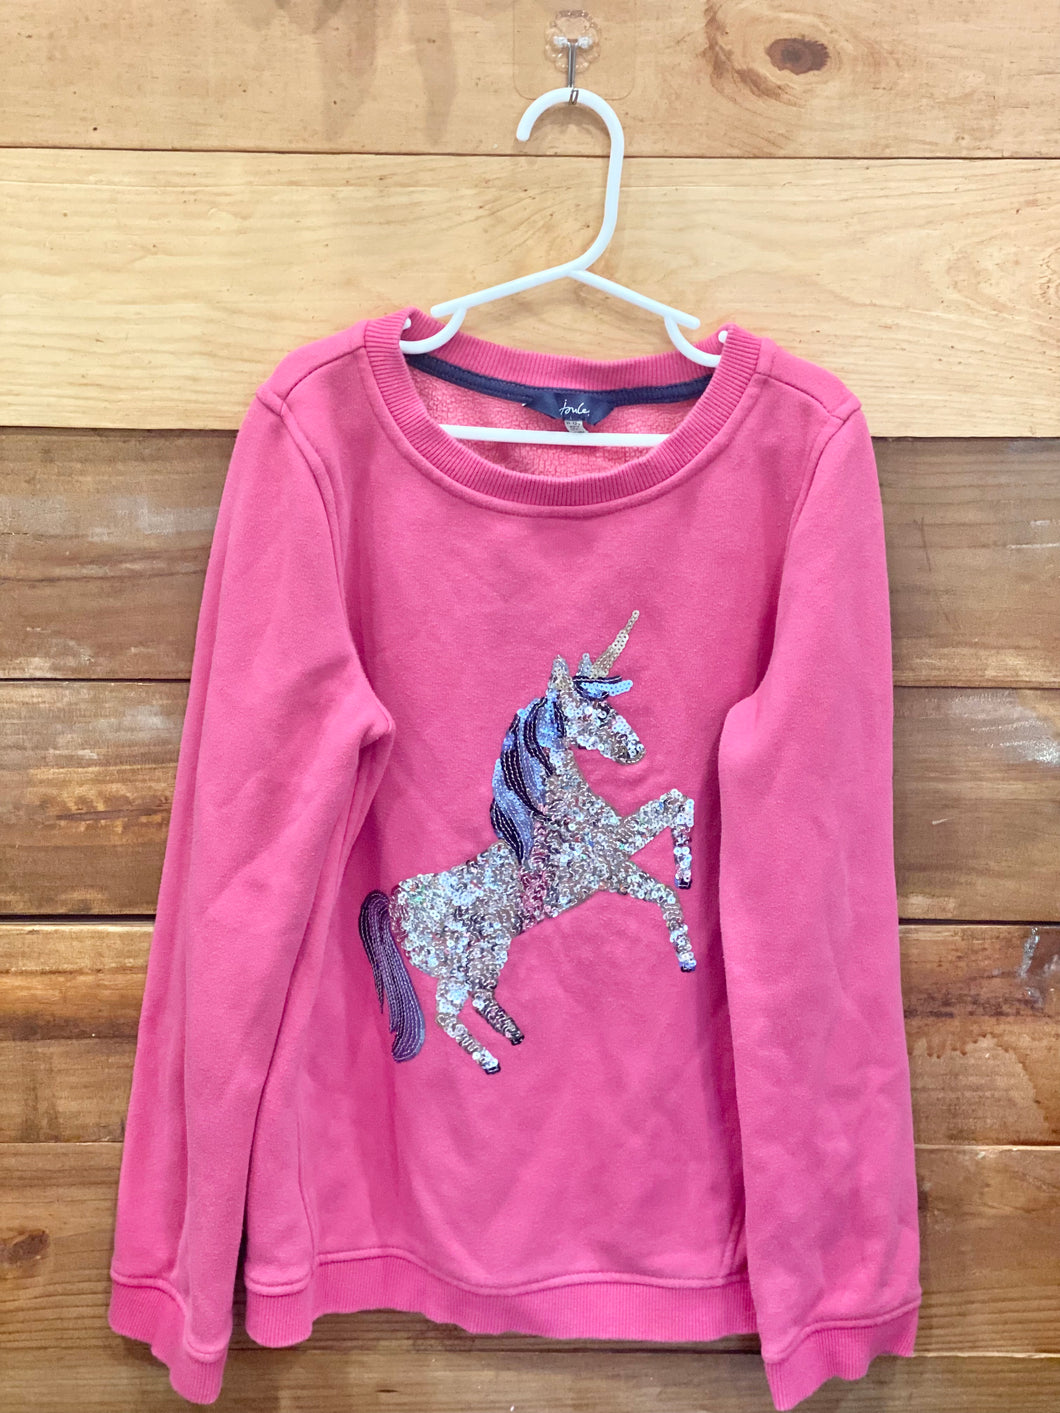 Joules Pink Unicorn Sweater Size 11-12Y